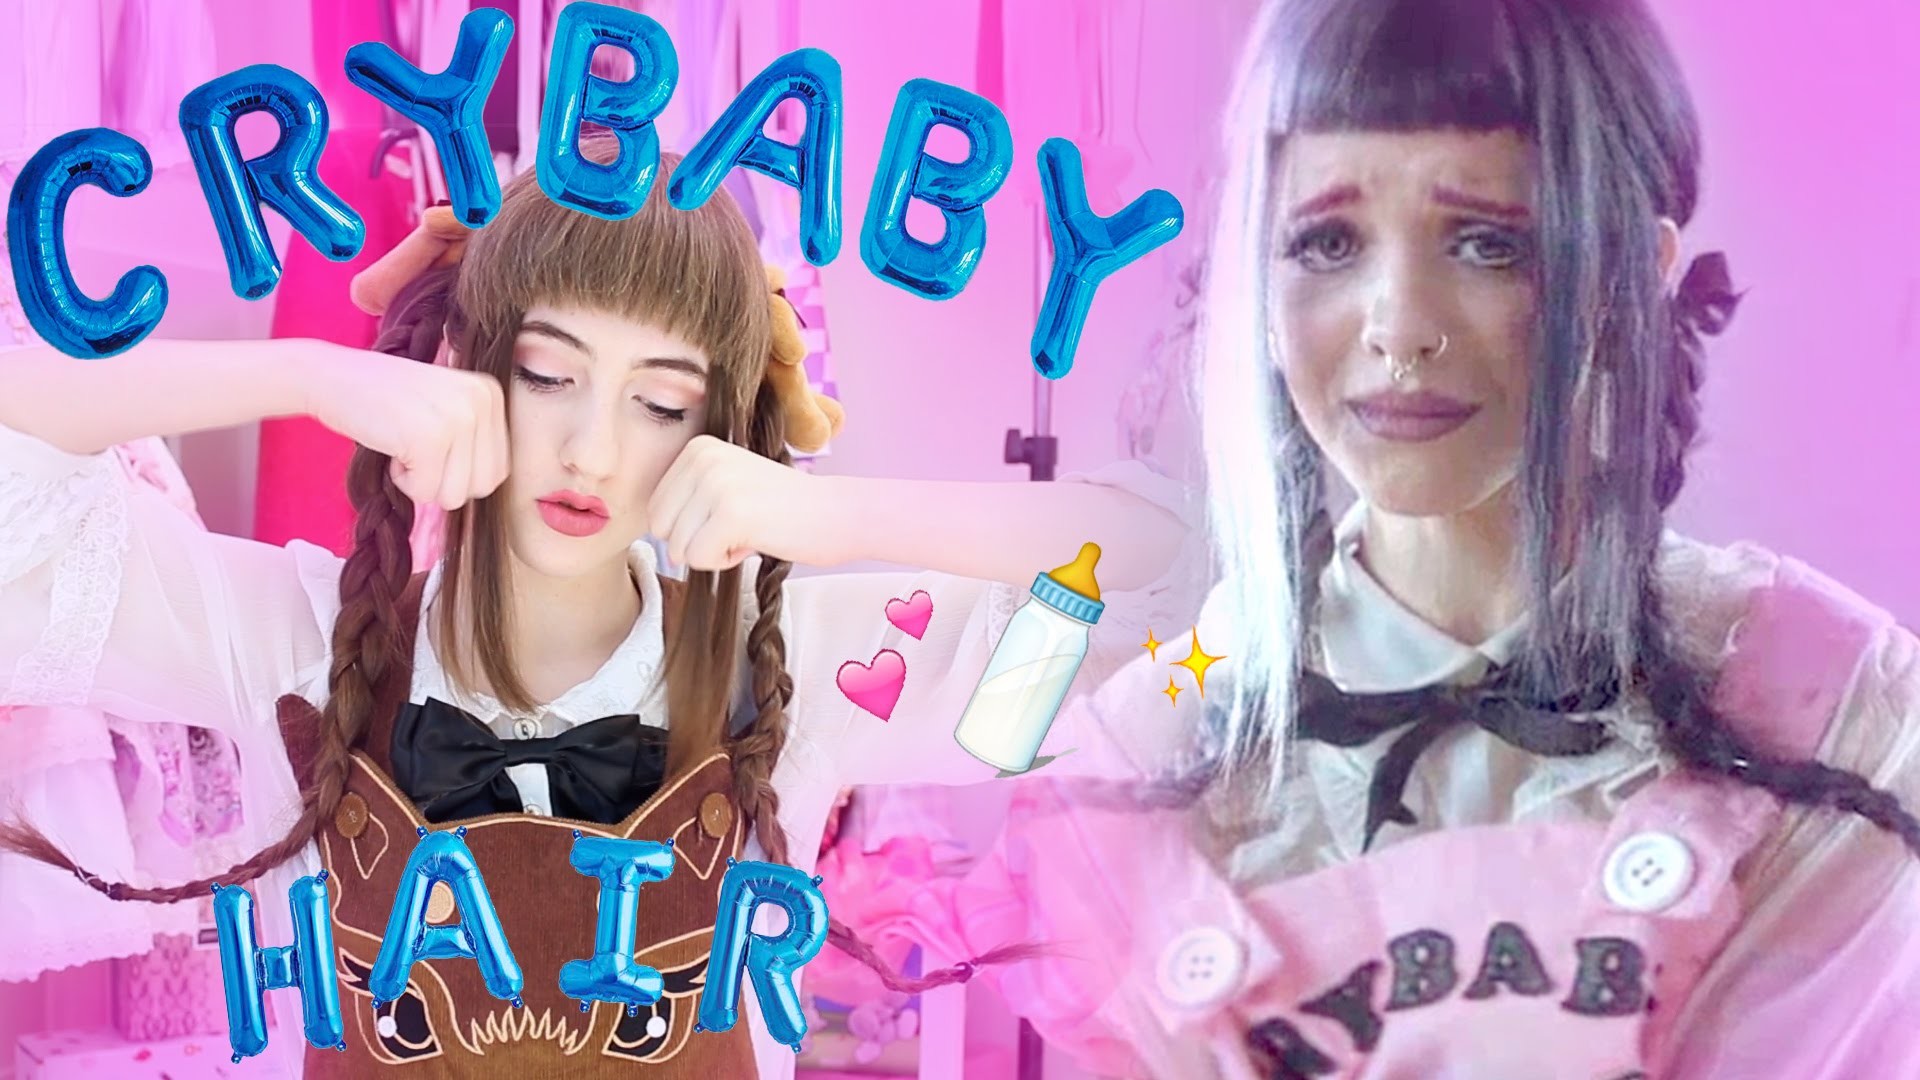 Melanie Martinez Cry Baby Wallpaper - Cry Baby , HD Wallpaper & Backgrounds